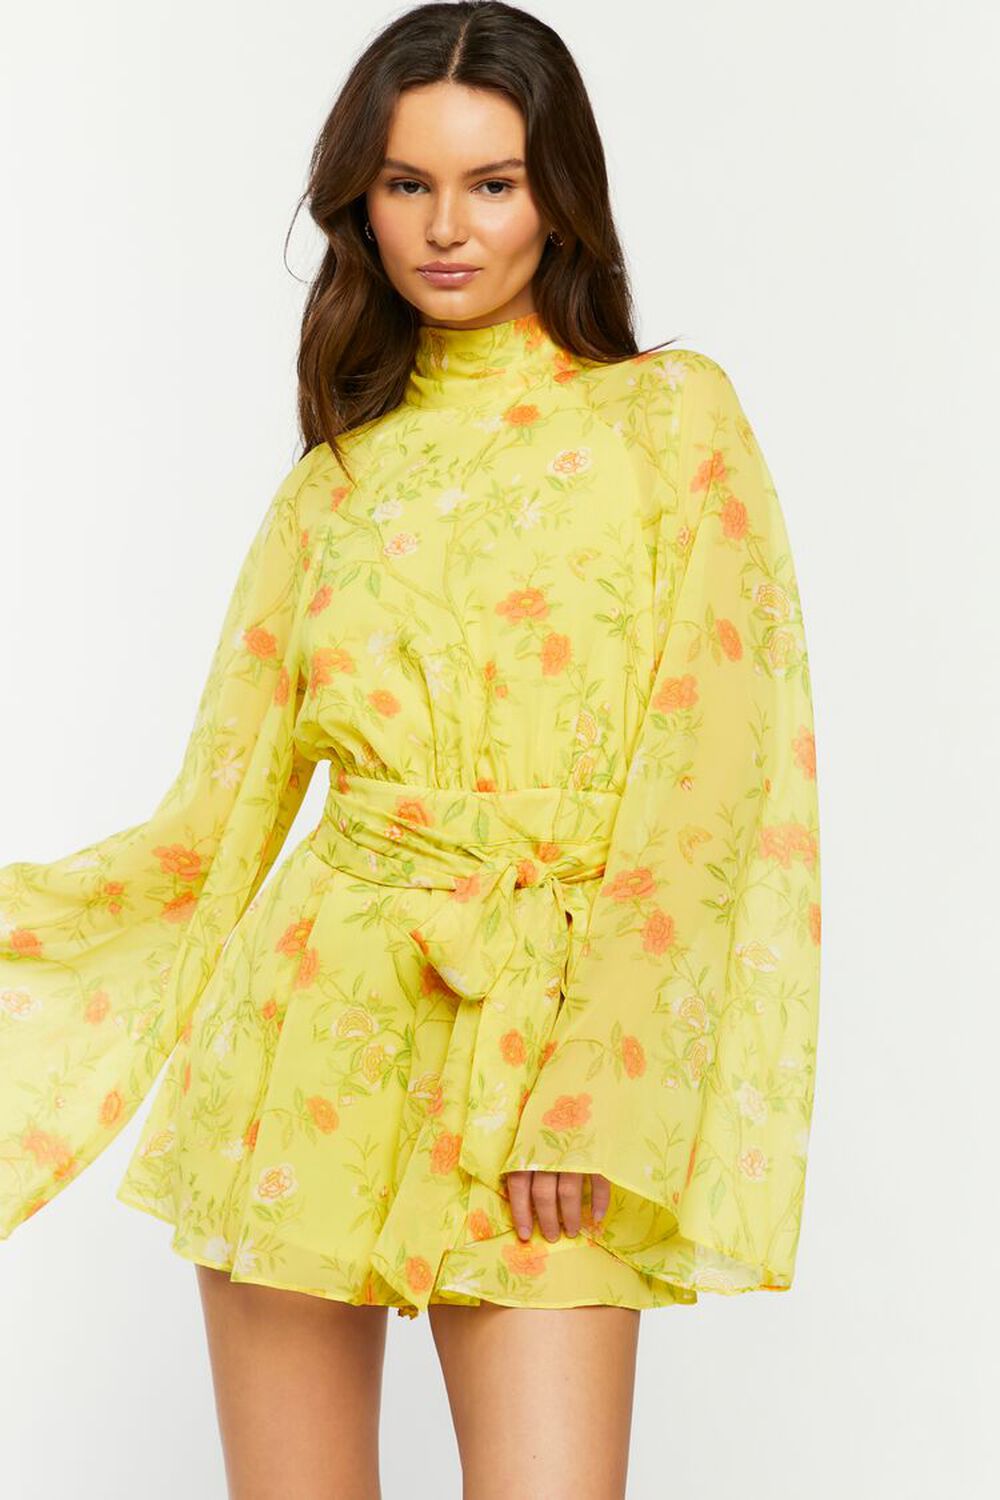 YELLOW/MULTI Floral Chiffon Bell-Sleeve Romper, image 1